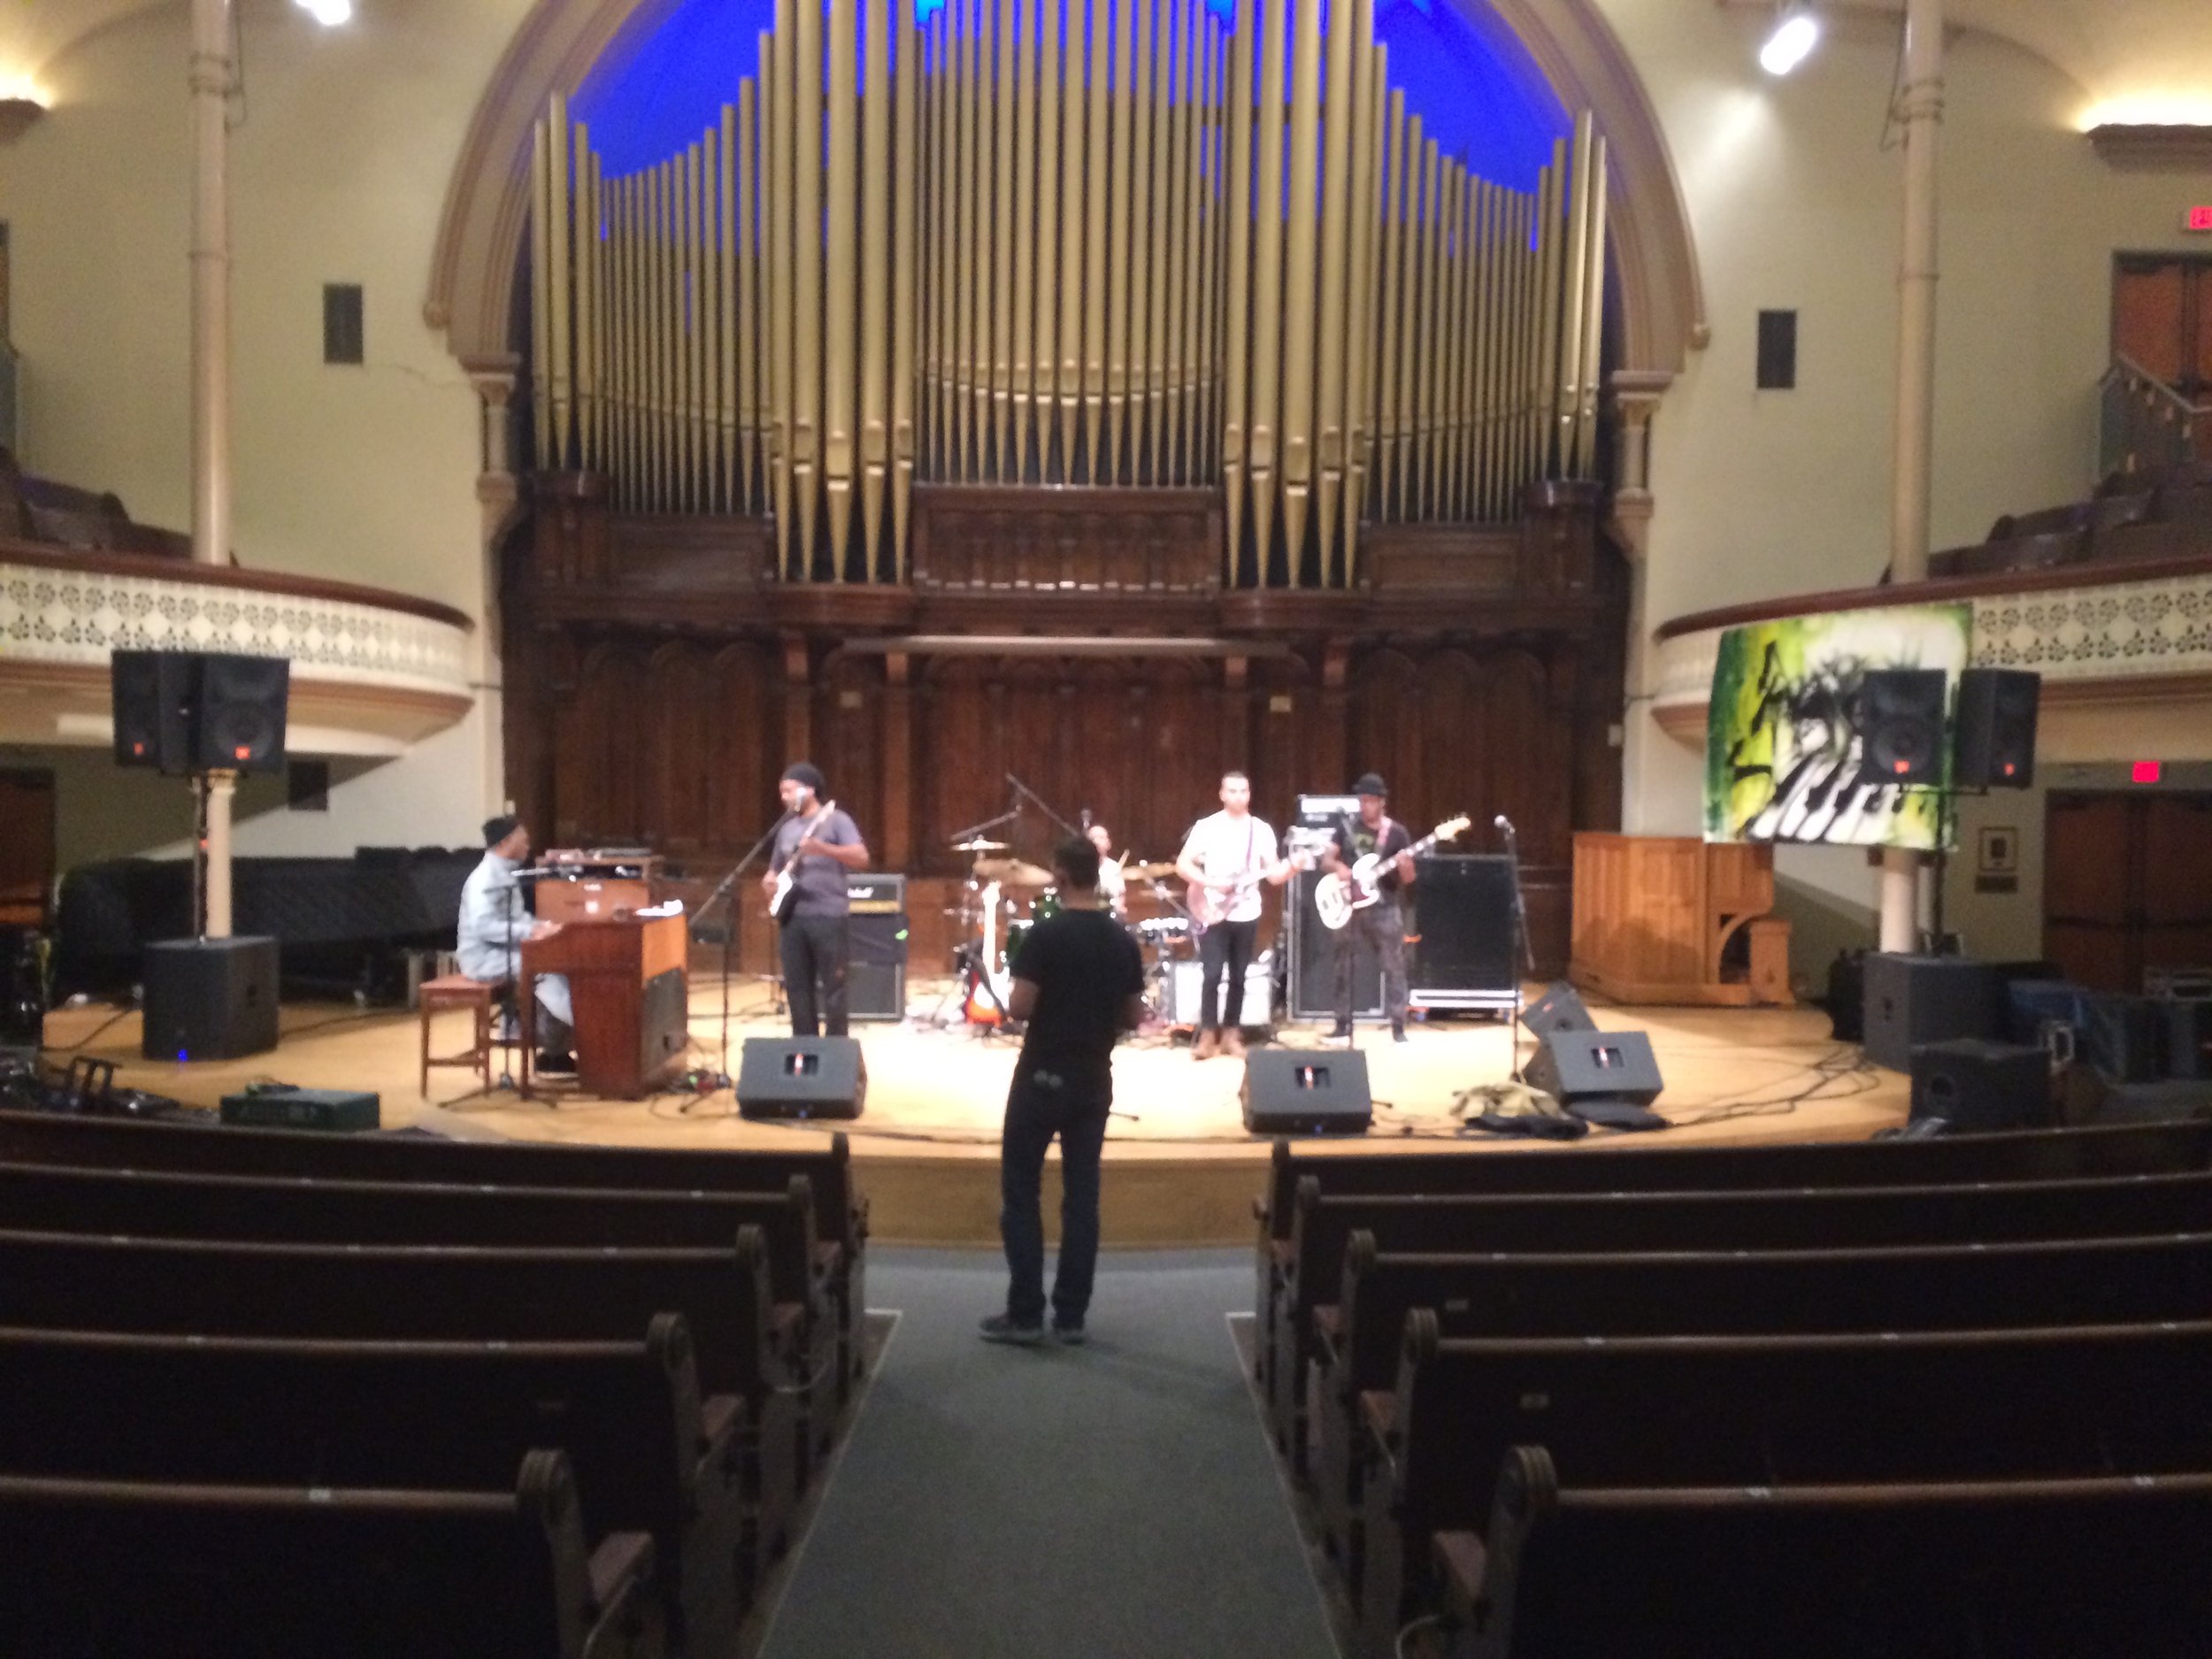 Booker T & The MG's sound check at Alix Goolden Hall. Equipment by Shortt Sound. 2016